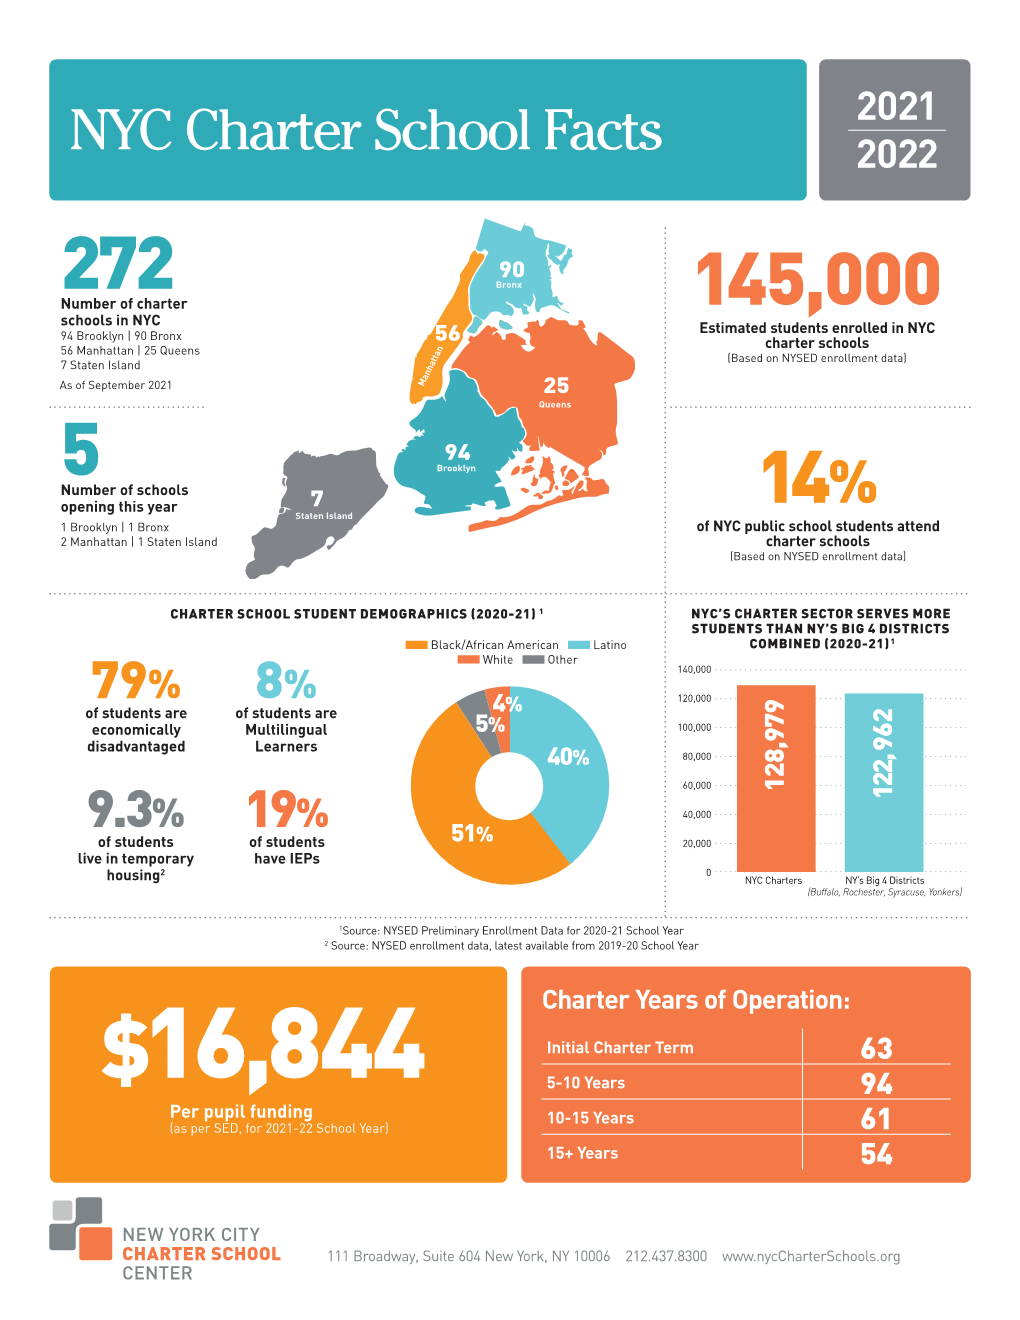 NYC Charter School Facts 2022